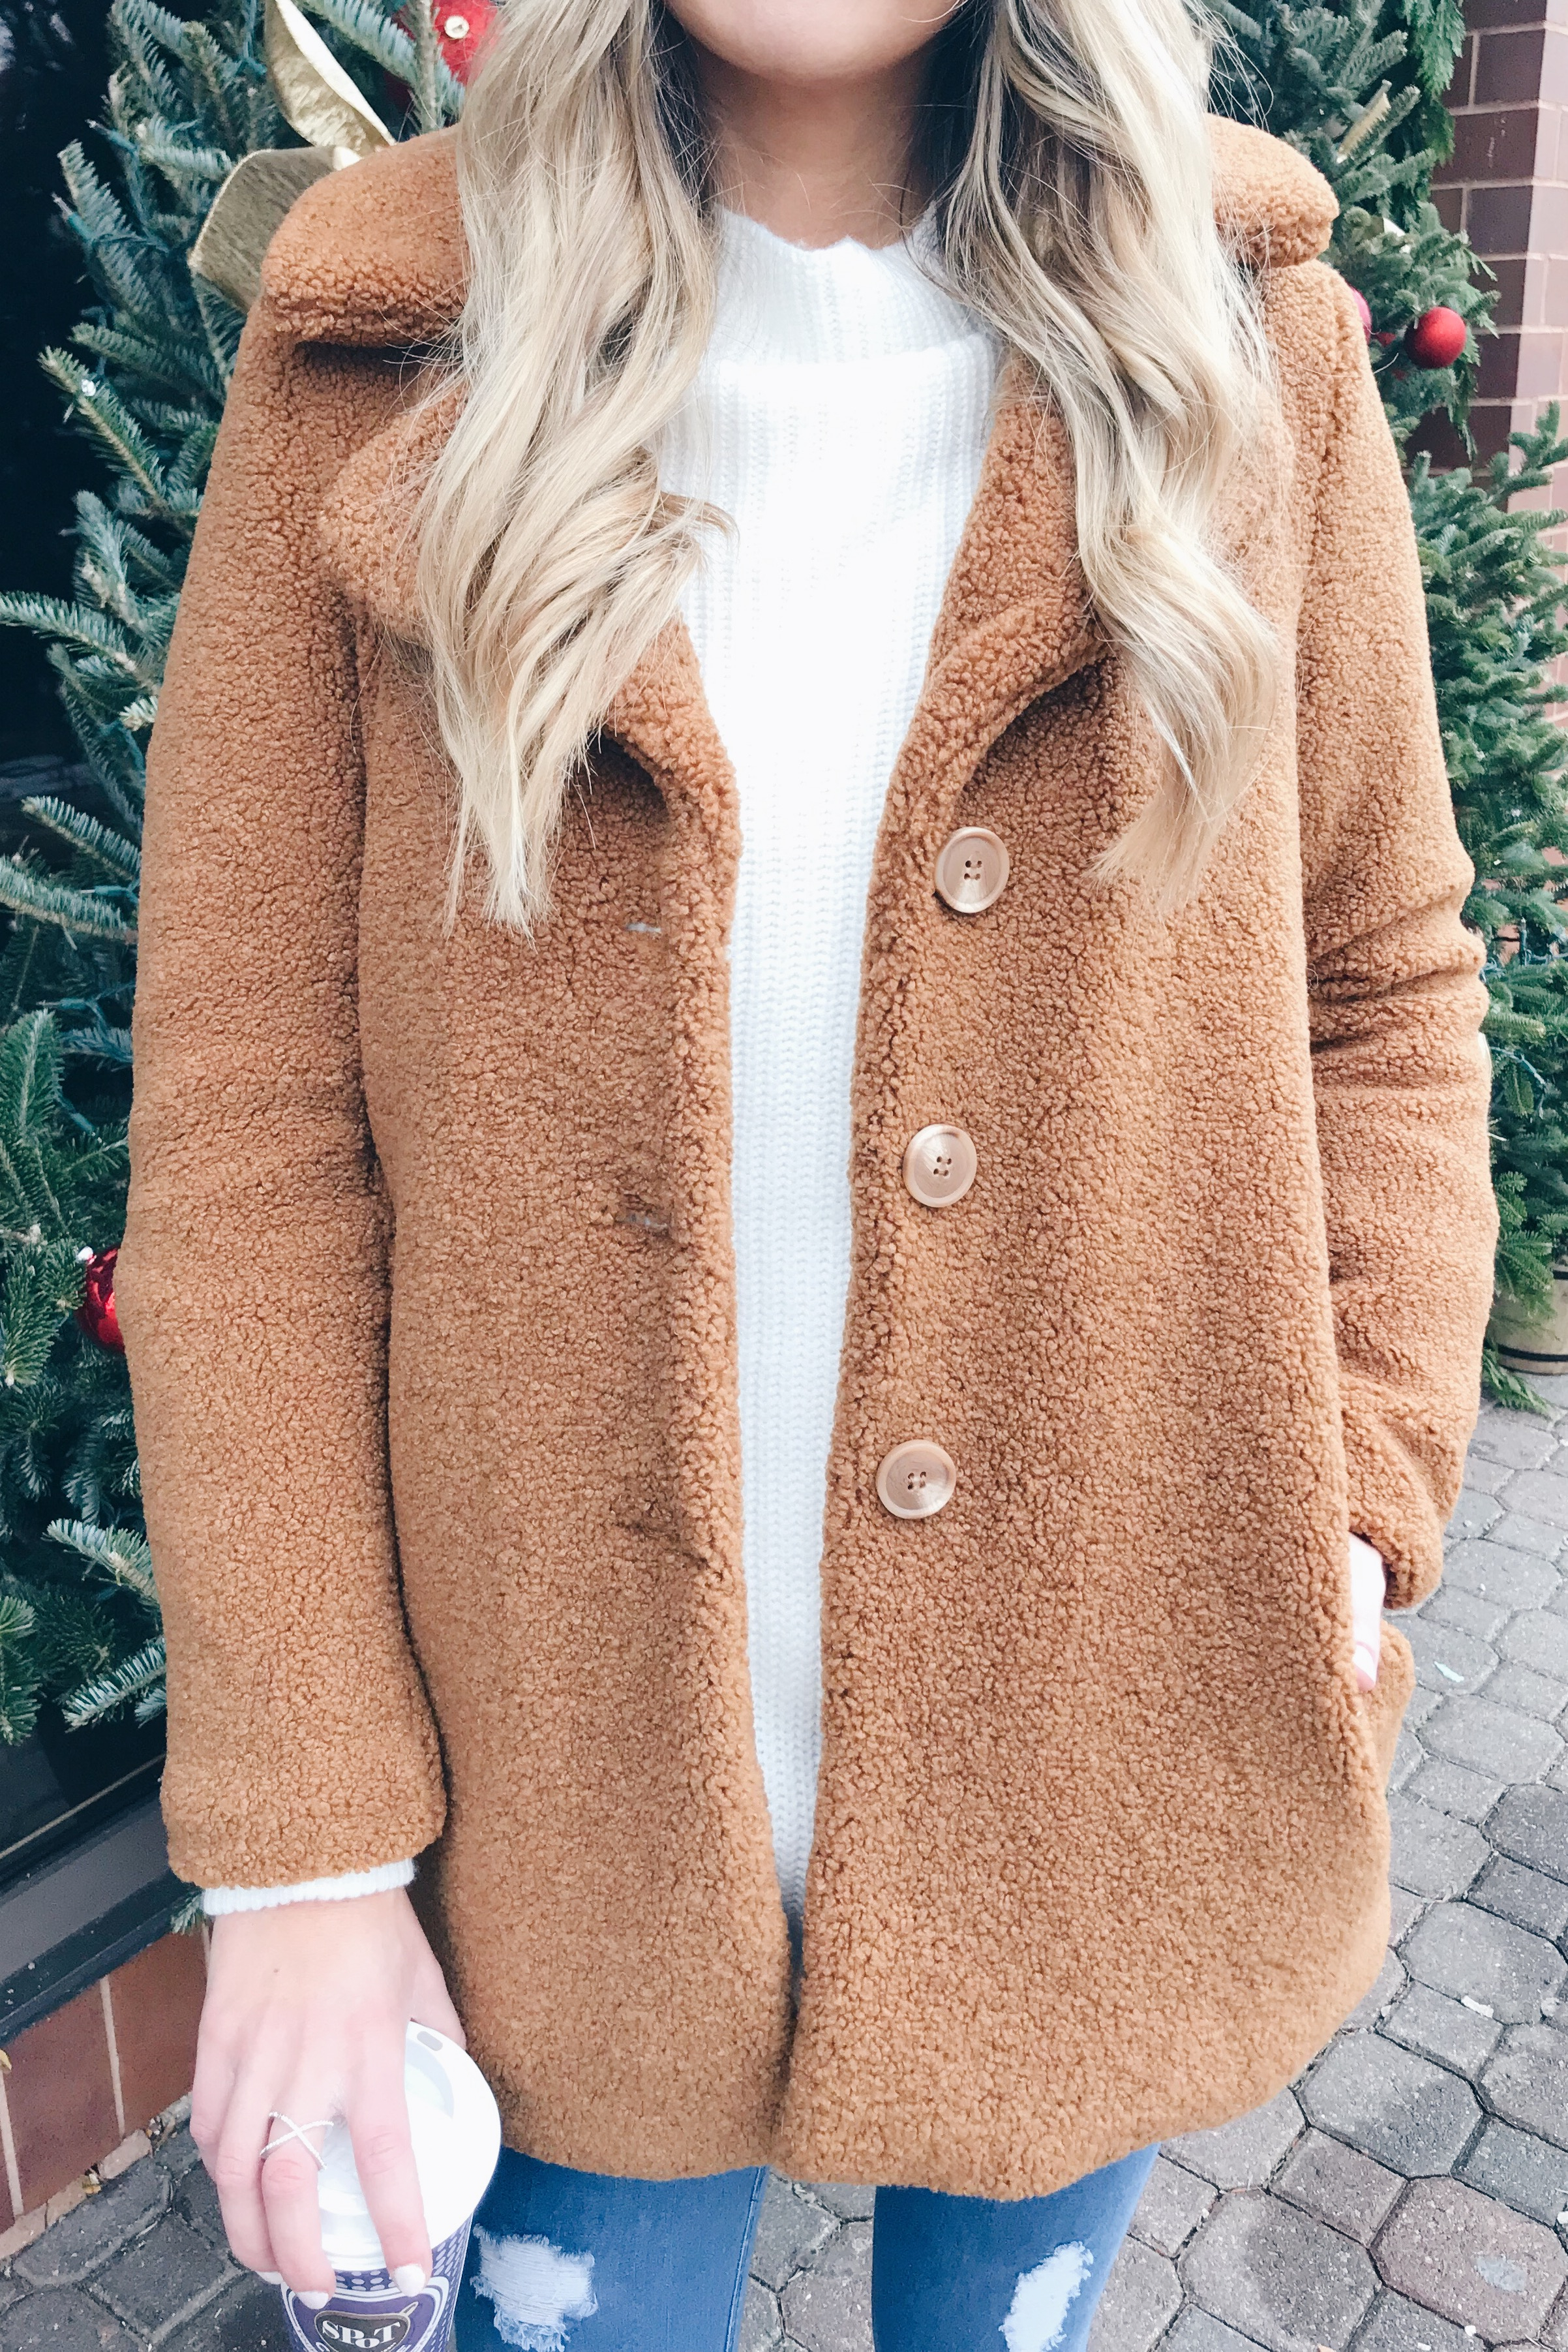 Teddy Coat Outfit Ideas | New England Style Blog